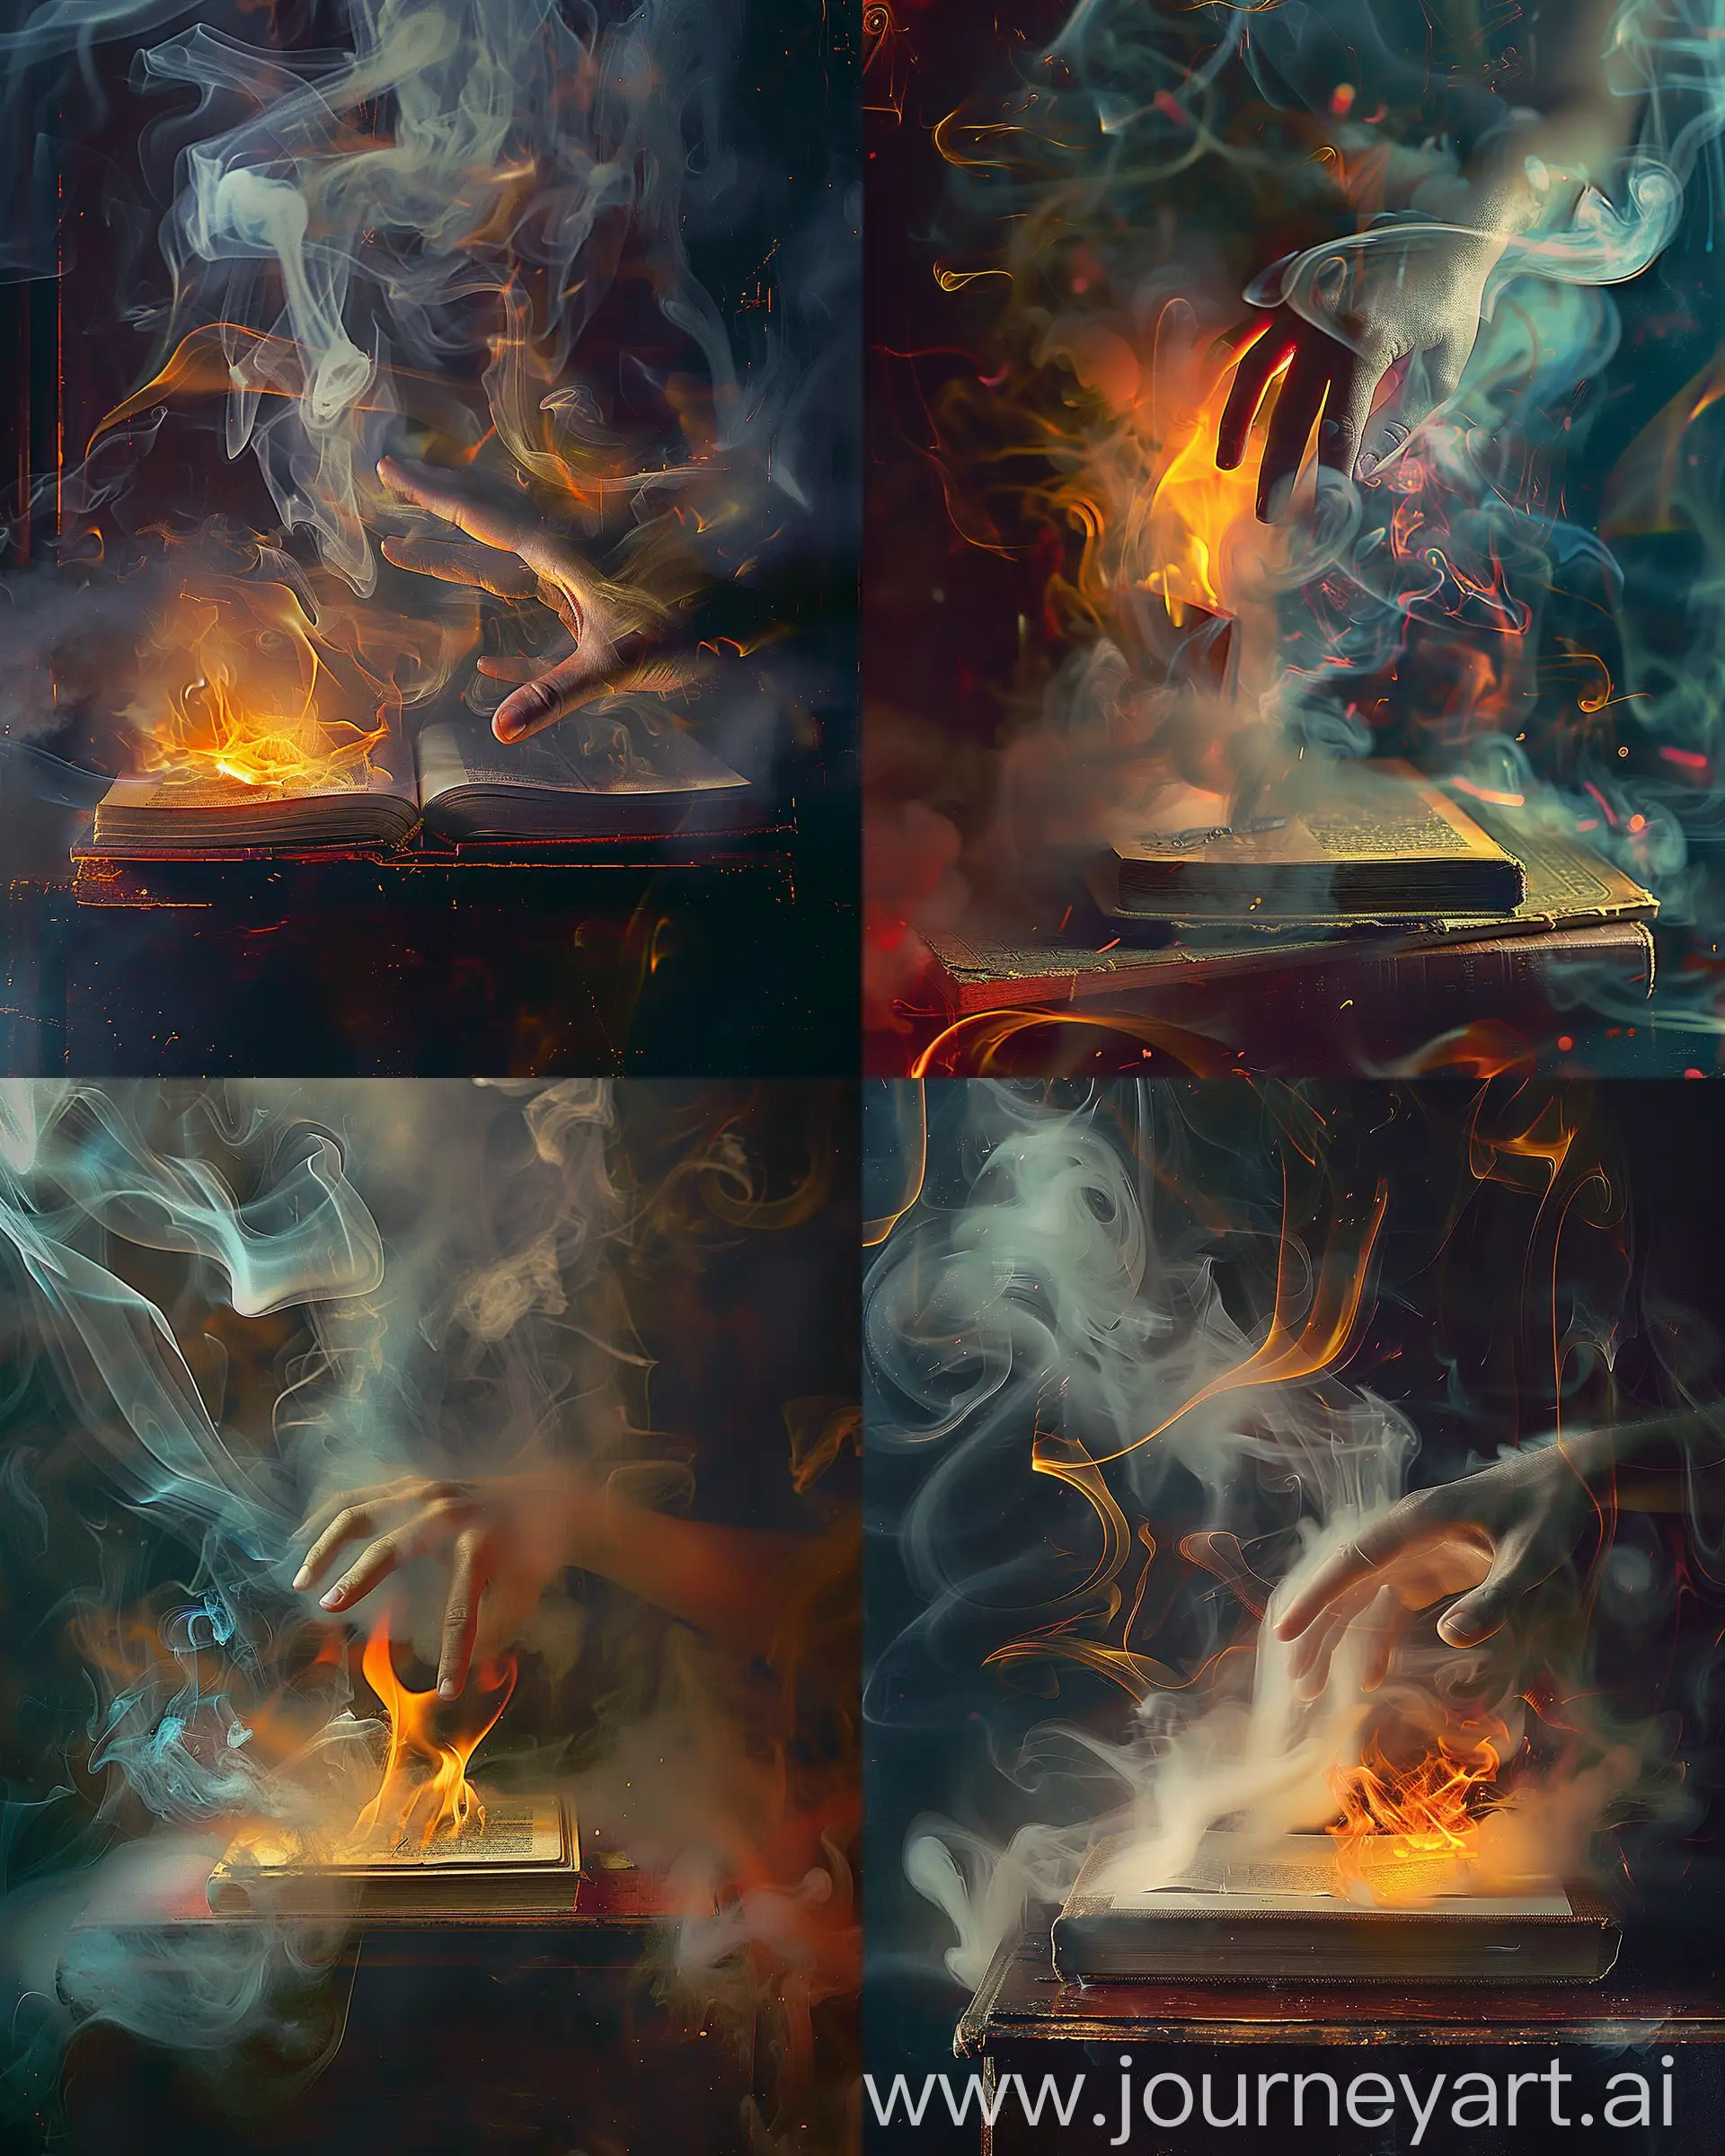 Emerging-Hand-Revealing-Burning-Book-in-a-Smoky-Abstract-Atmosphere